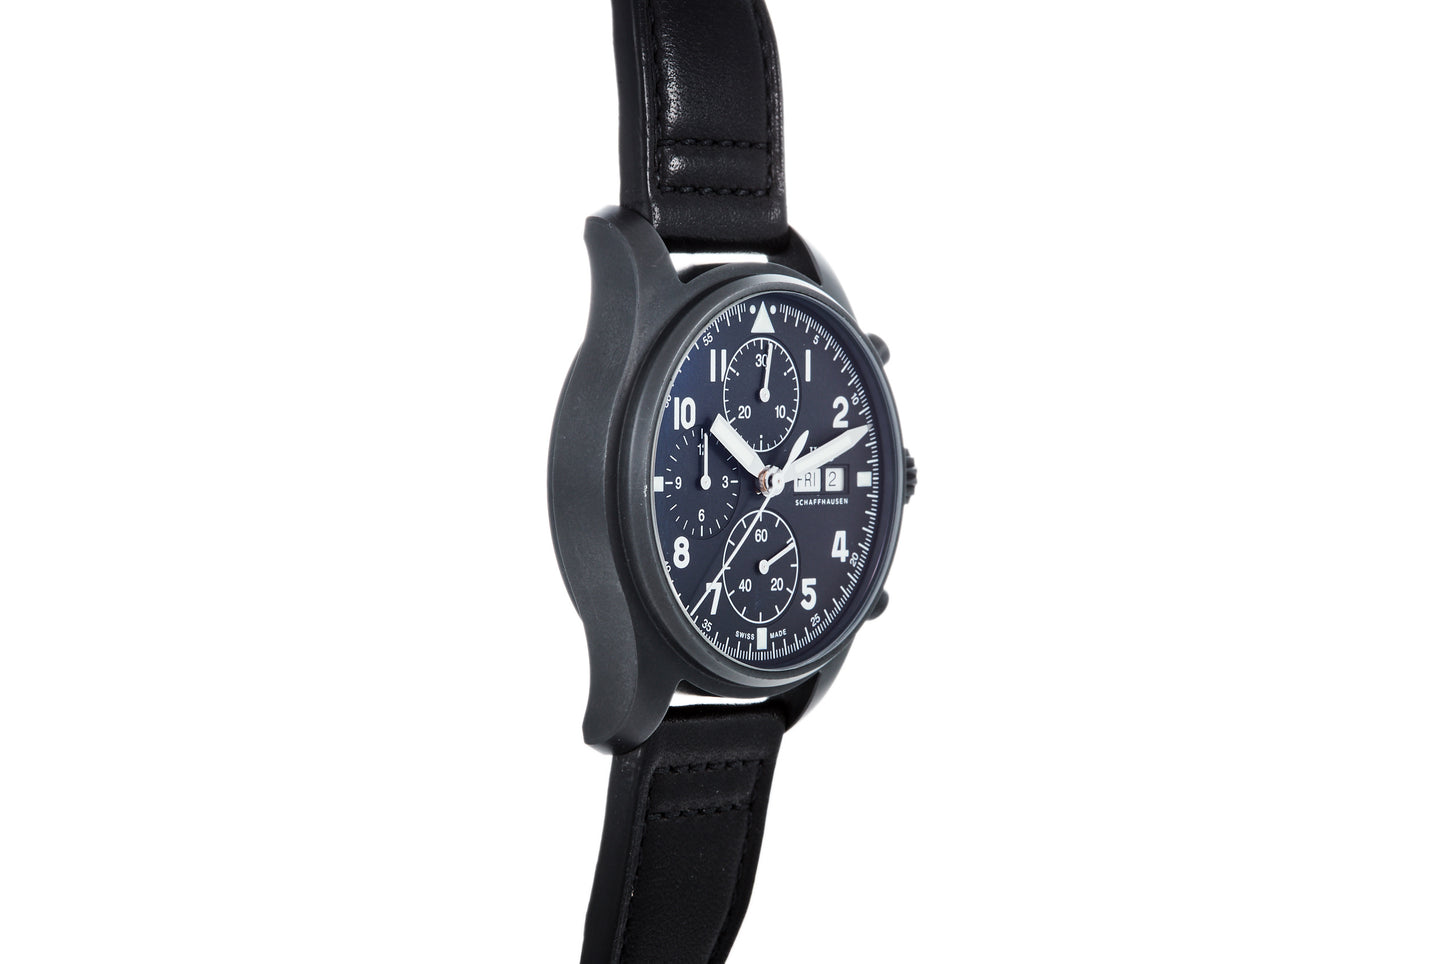 IWC Pilot's Watch Chronograph 'Tribute To 3705'